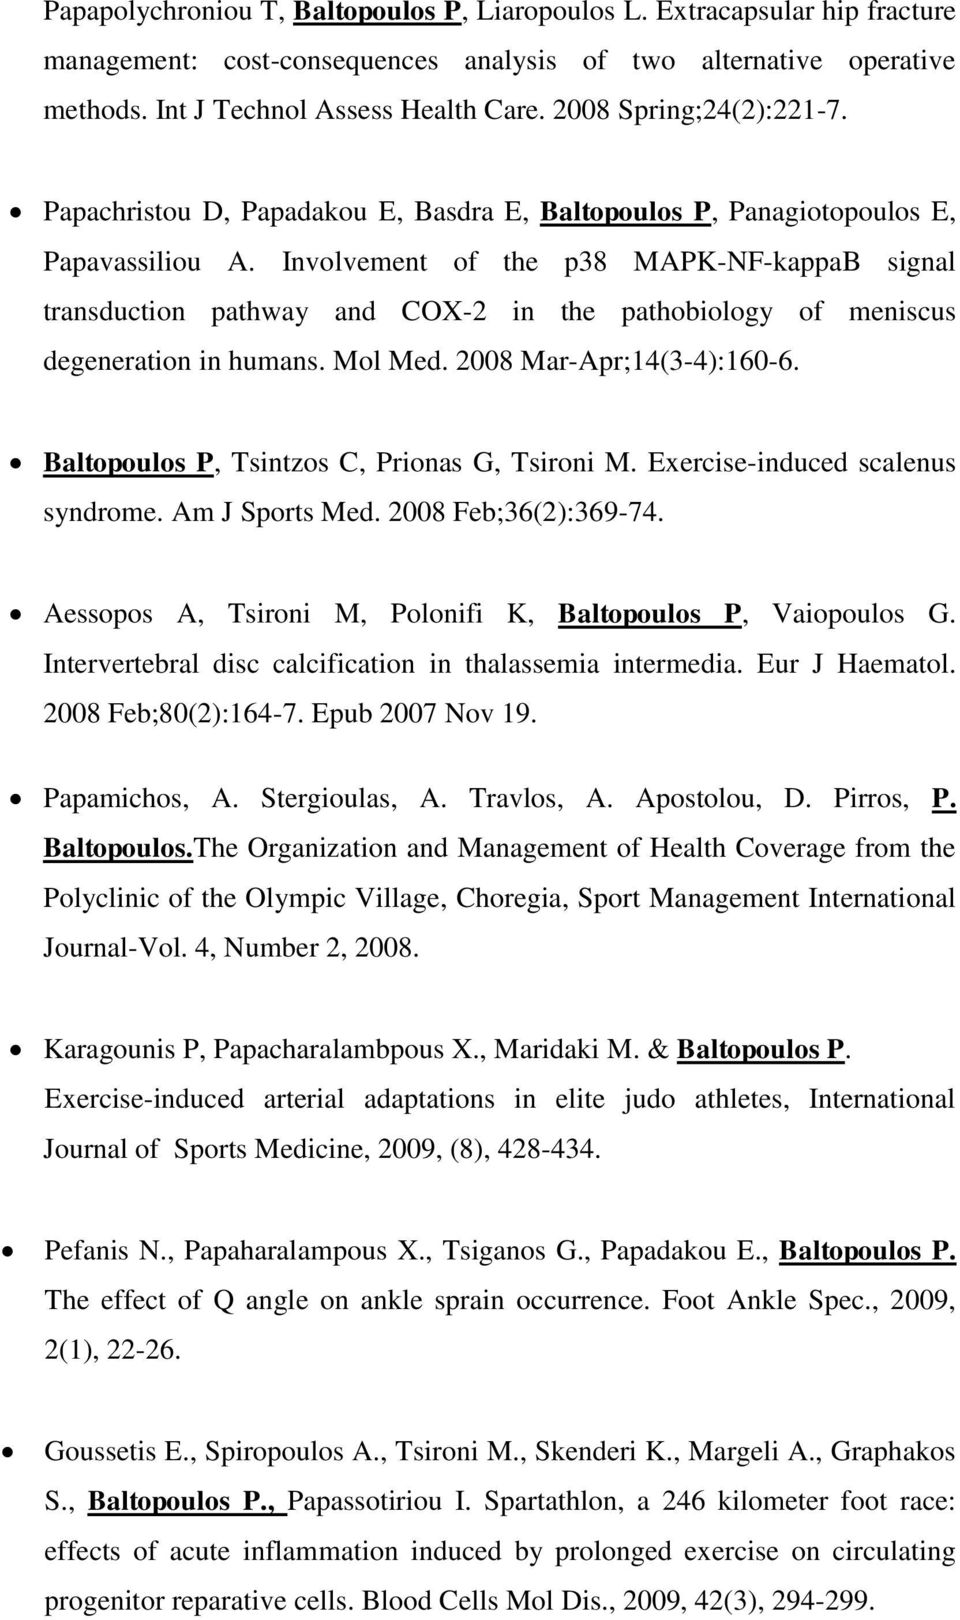 Involvement of the p38 MAPK-NF-kappaB signal transduction pathway and COX-2 in the pathobiology of meniscus degeneration in humans. Mol Med. 2008 Mar-Apr;14(3-4):160-6.